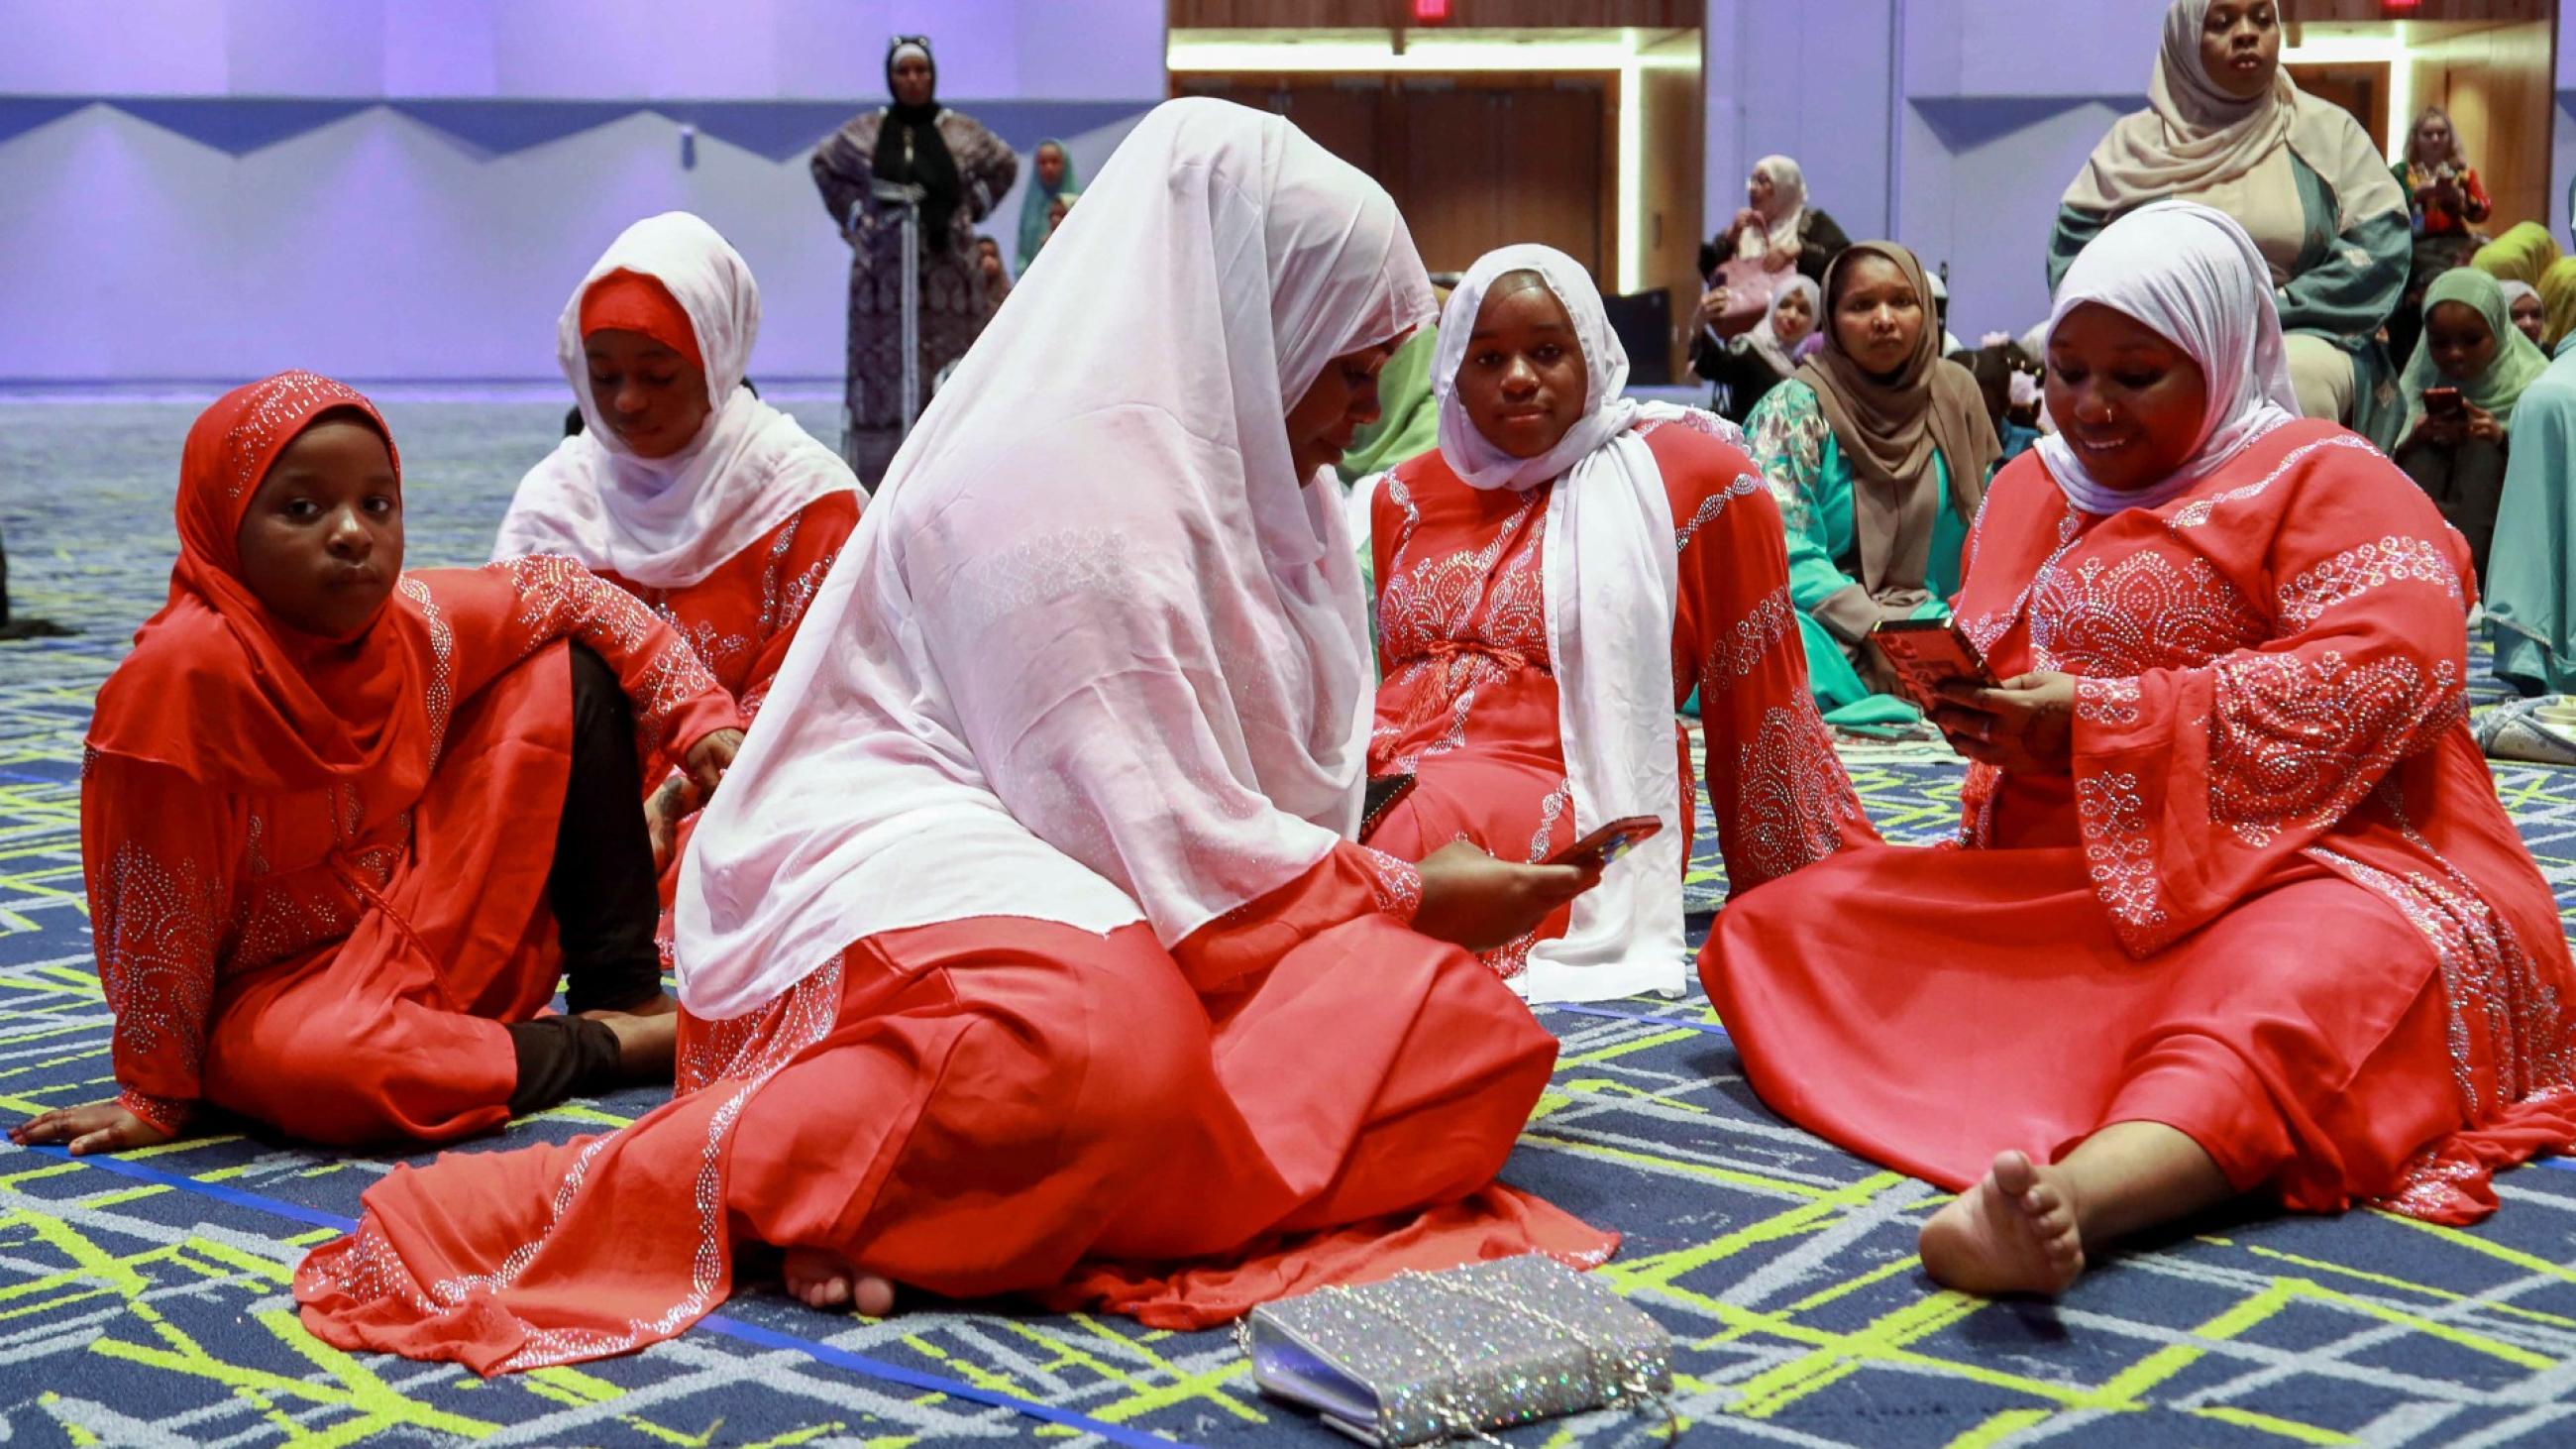 The Alis, an immigrant family from Kenya, gather with the Muslim community at Kentucky International Convention Center to celebrate the Eid al-Adha festival, in Louisville, Kentucky, on July 9, 2022. 